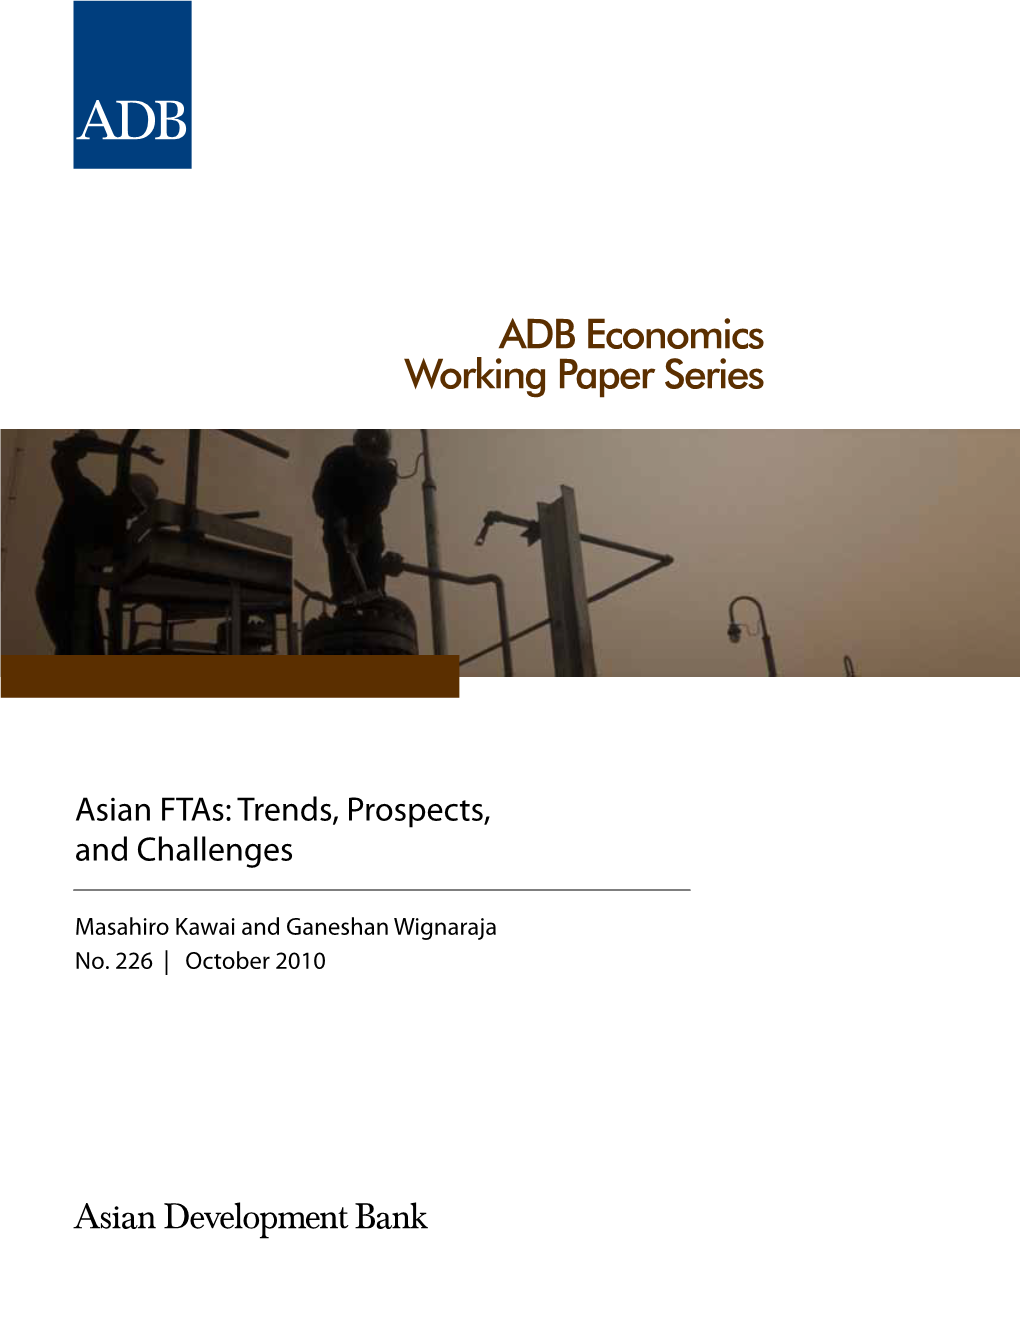 Asian Ftas: Trends, Prospects, and Challenges